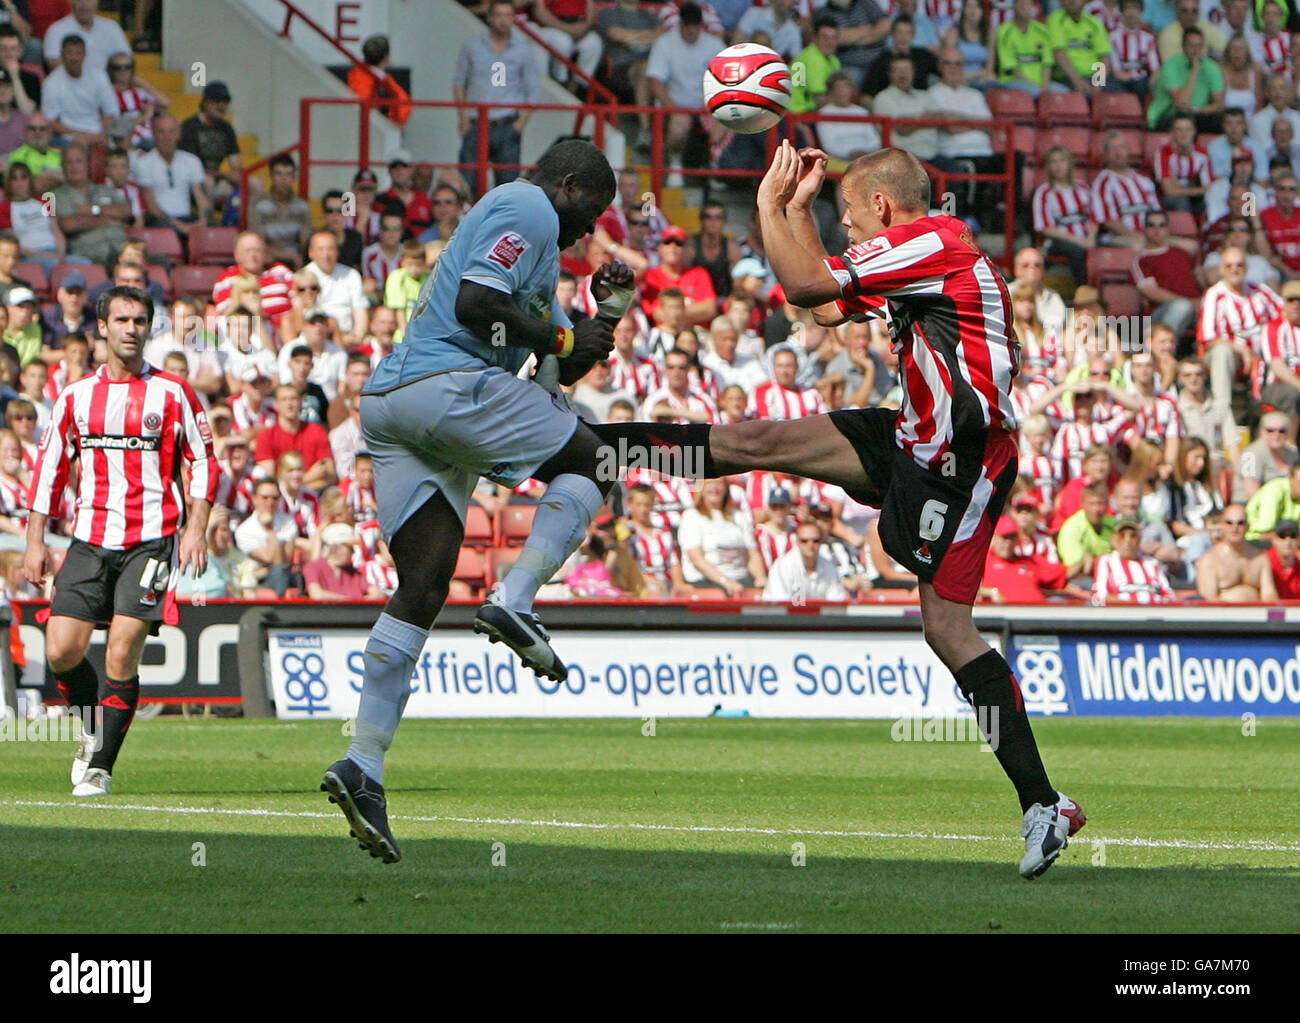 Colchester United's George Elokobi and Sheffield United's James Beattie battle for the ball during the Coca-Cola Football League Championship match at Bramall Lane, Sheffield. Stock Photo